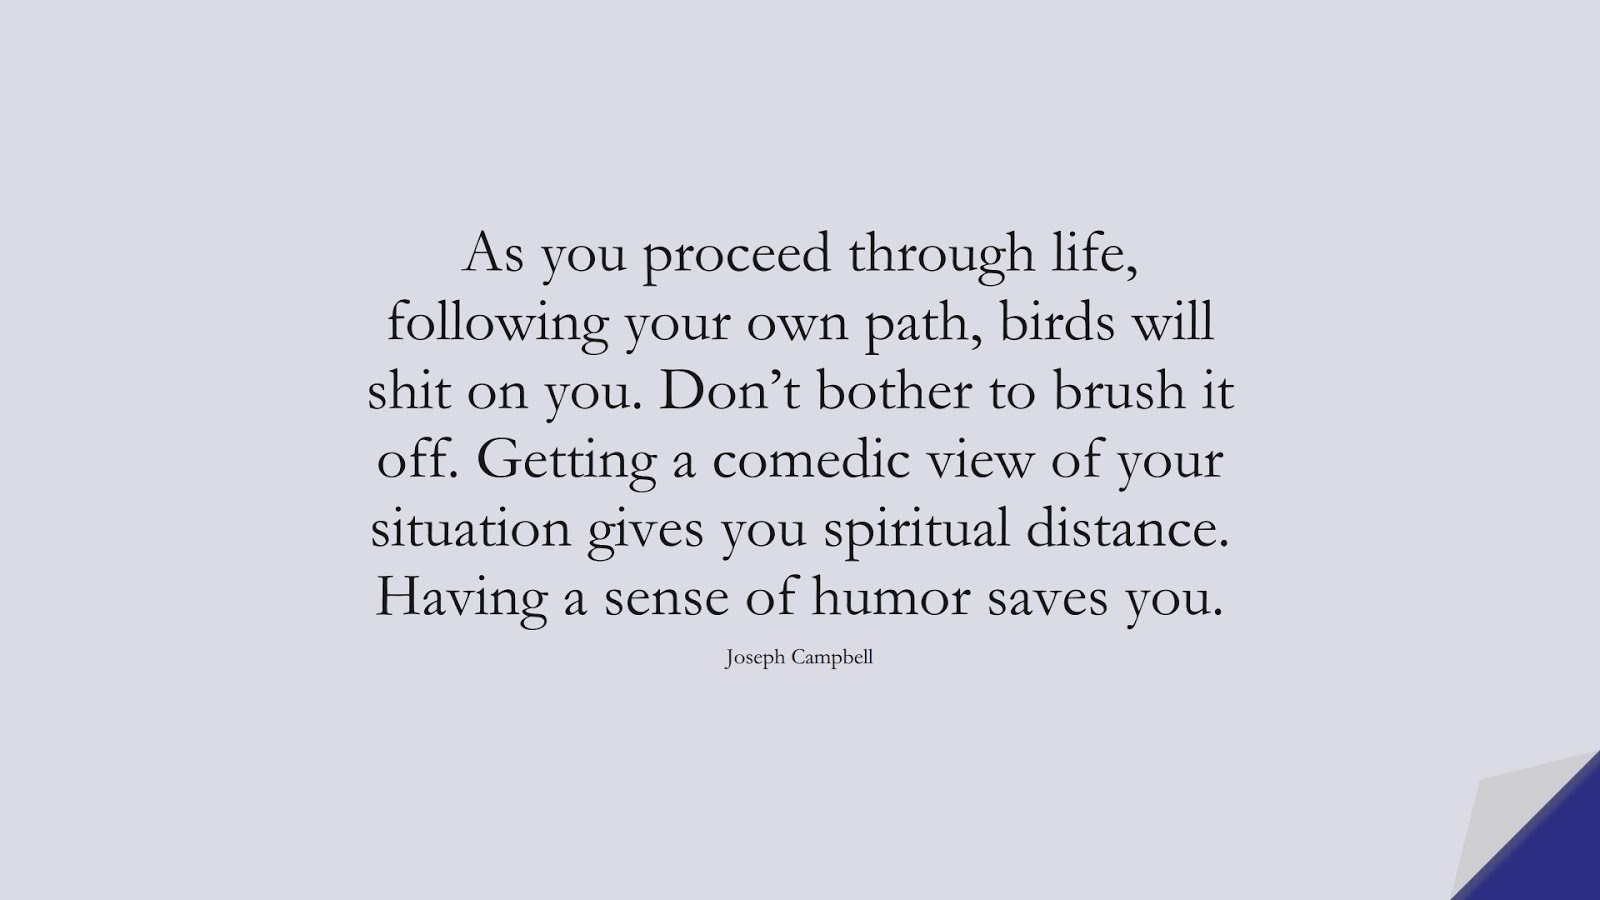 As you proceed through life, following your own path, birds will shit on you. Don’t bother to brush it off. Getting a comedic view of your situation gives you spiritual distance. Having a sense of humor saves you. (Joseph Campbell);  #PositiveQuotes